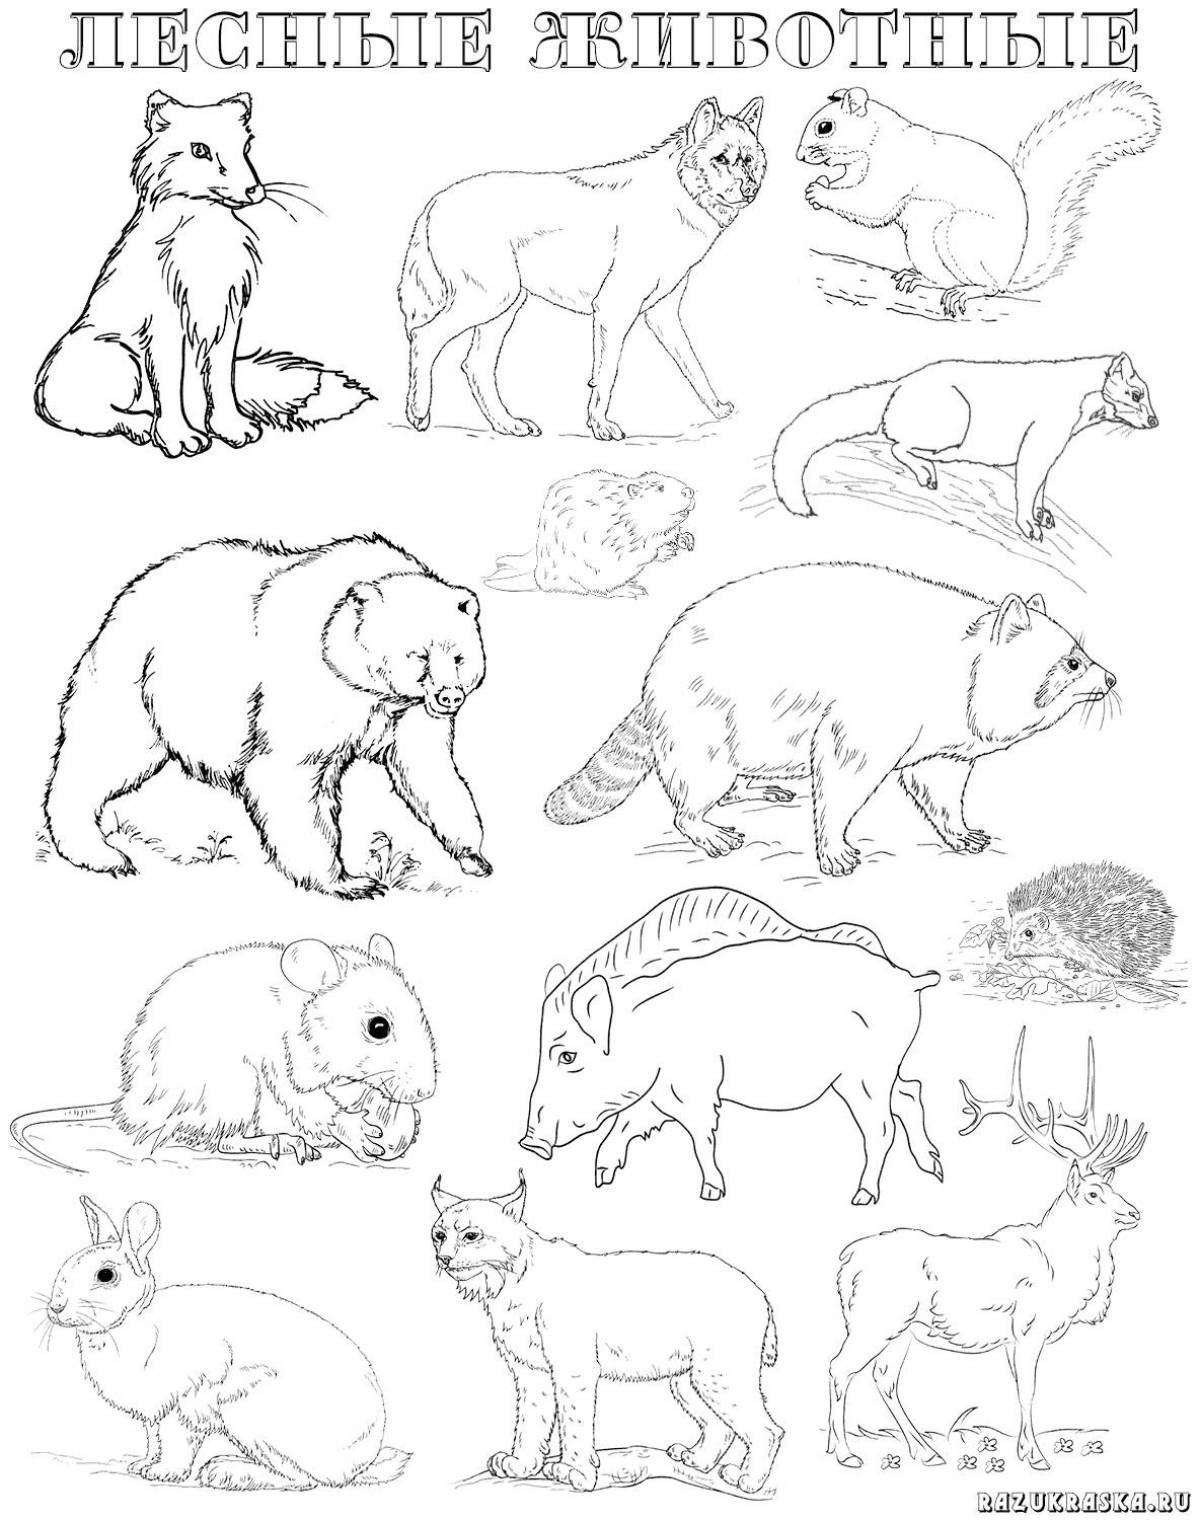 Playful wild animal coloring page for 4-5 year olds